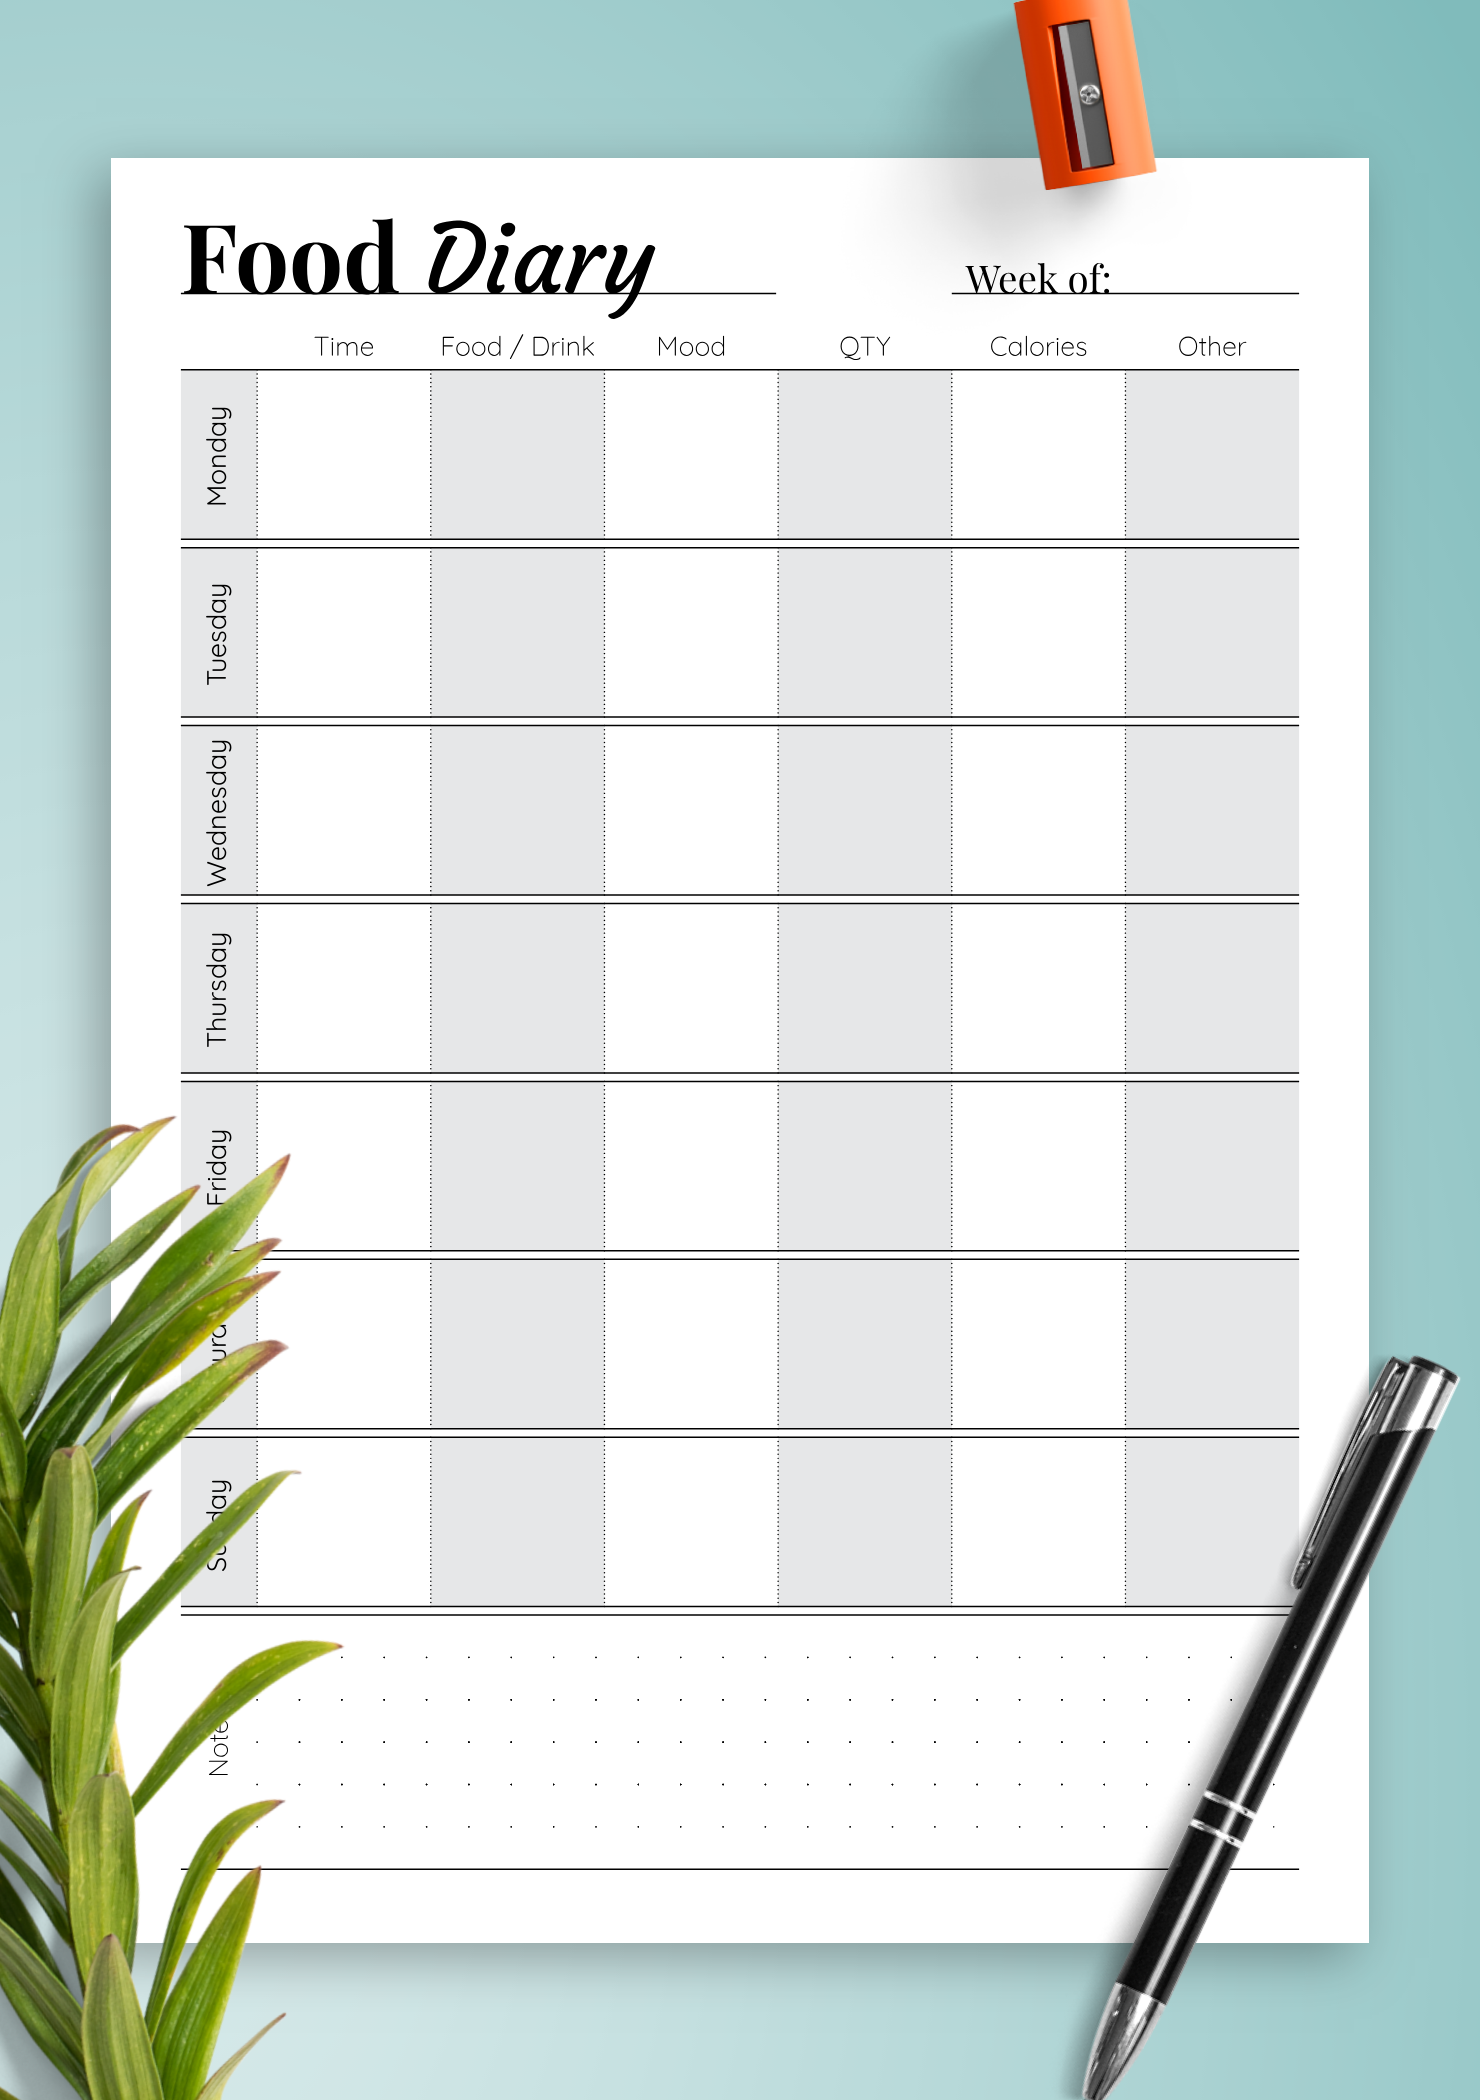 printable-food-diary-form-printable-forms-free-online